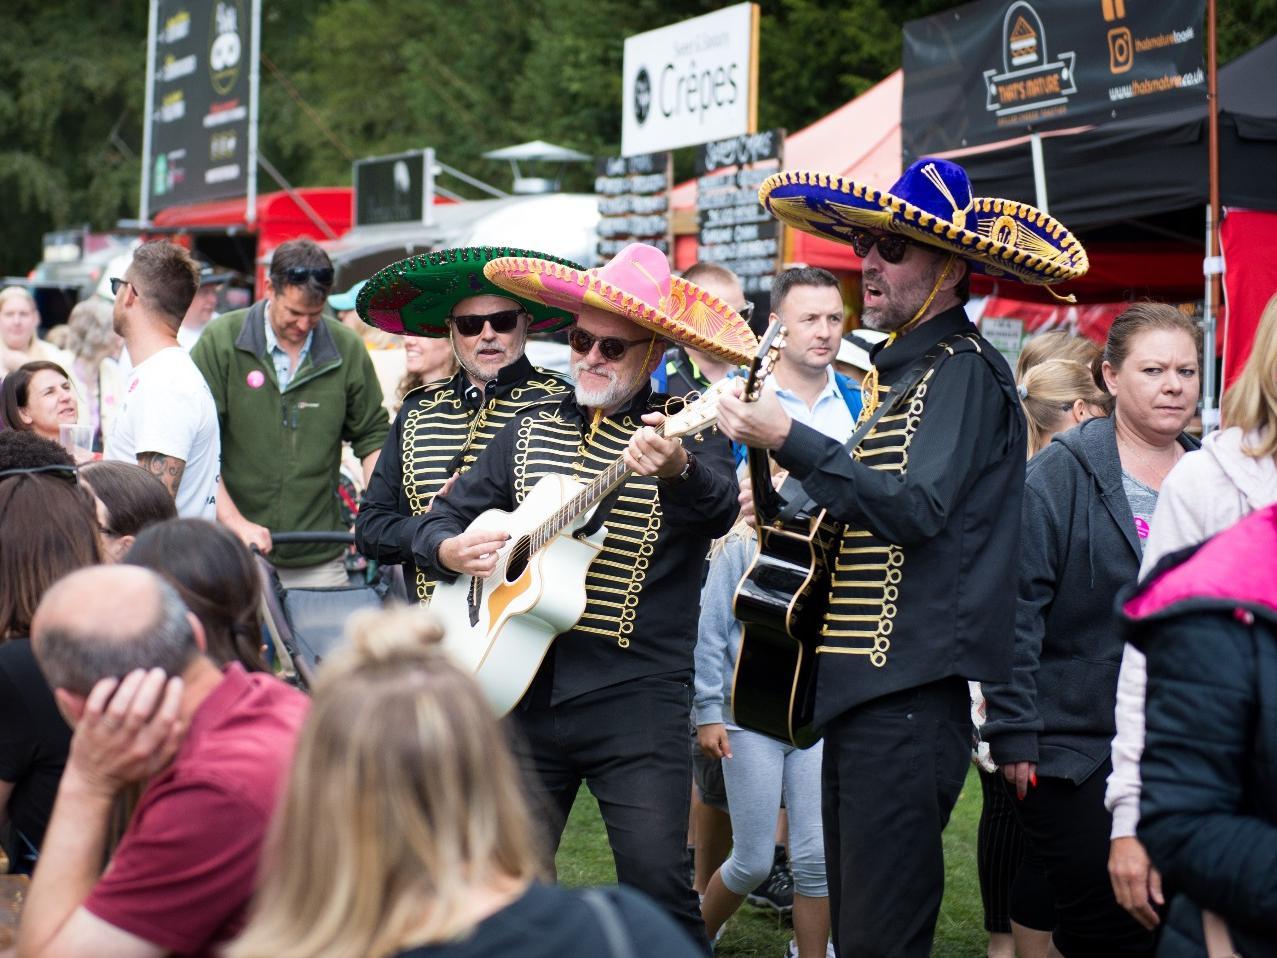 From live music to food tastings and stalls, there was plenty on offer over the weekend